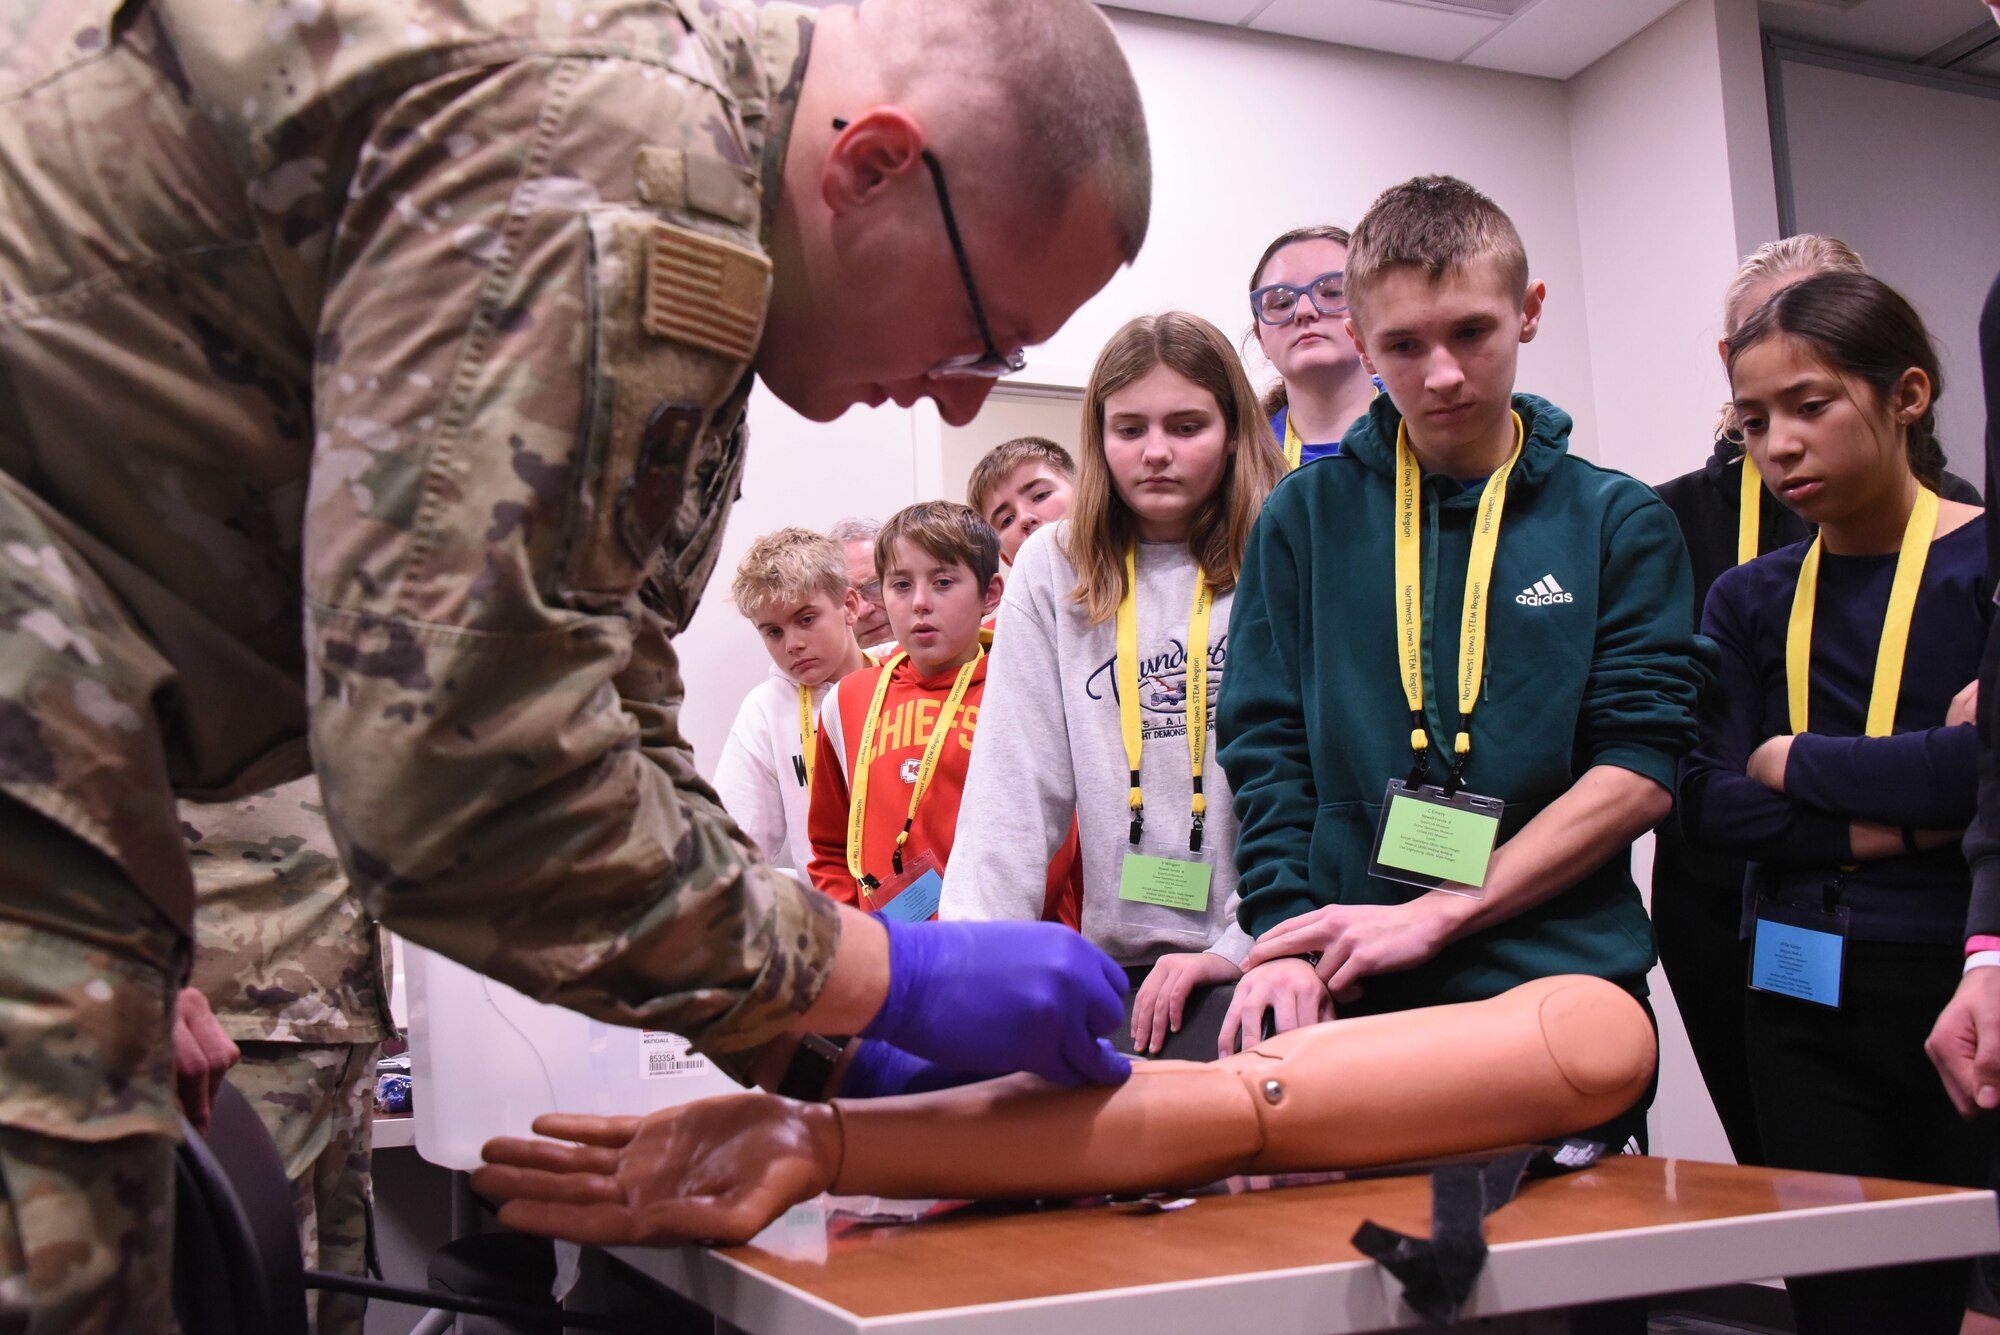 U.S. Air National Guard Tech. Sgt. Daniel Hinds starts IV catheter on simulation arm in front of students